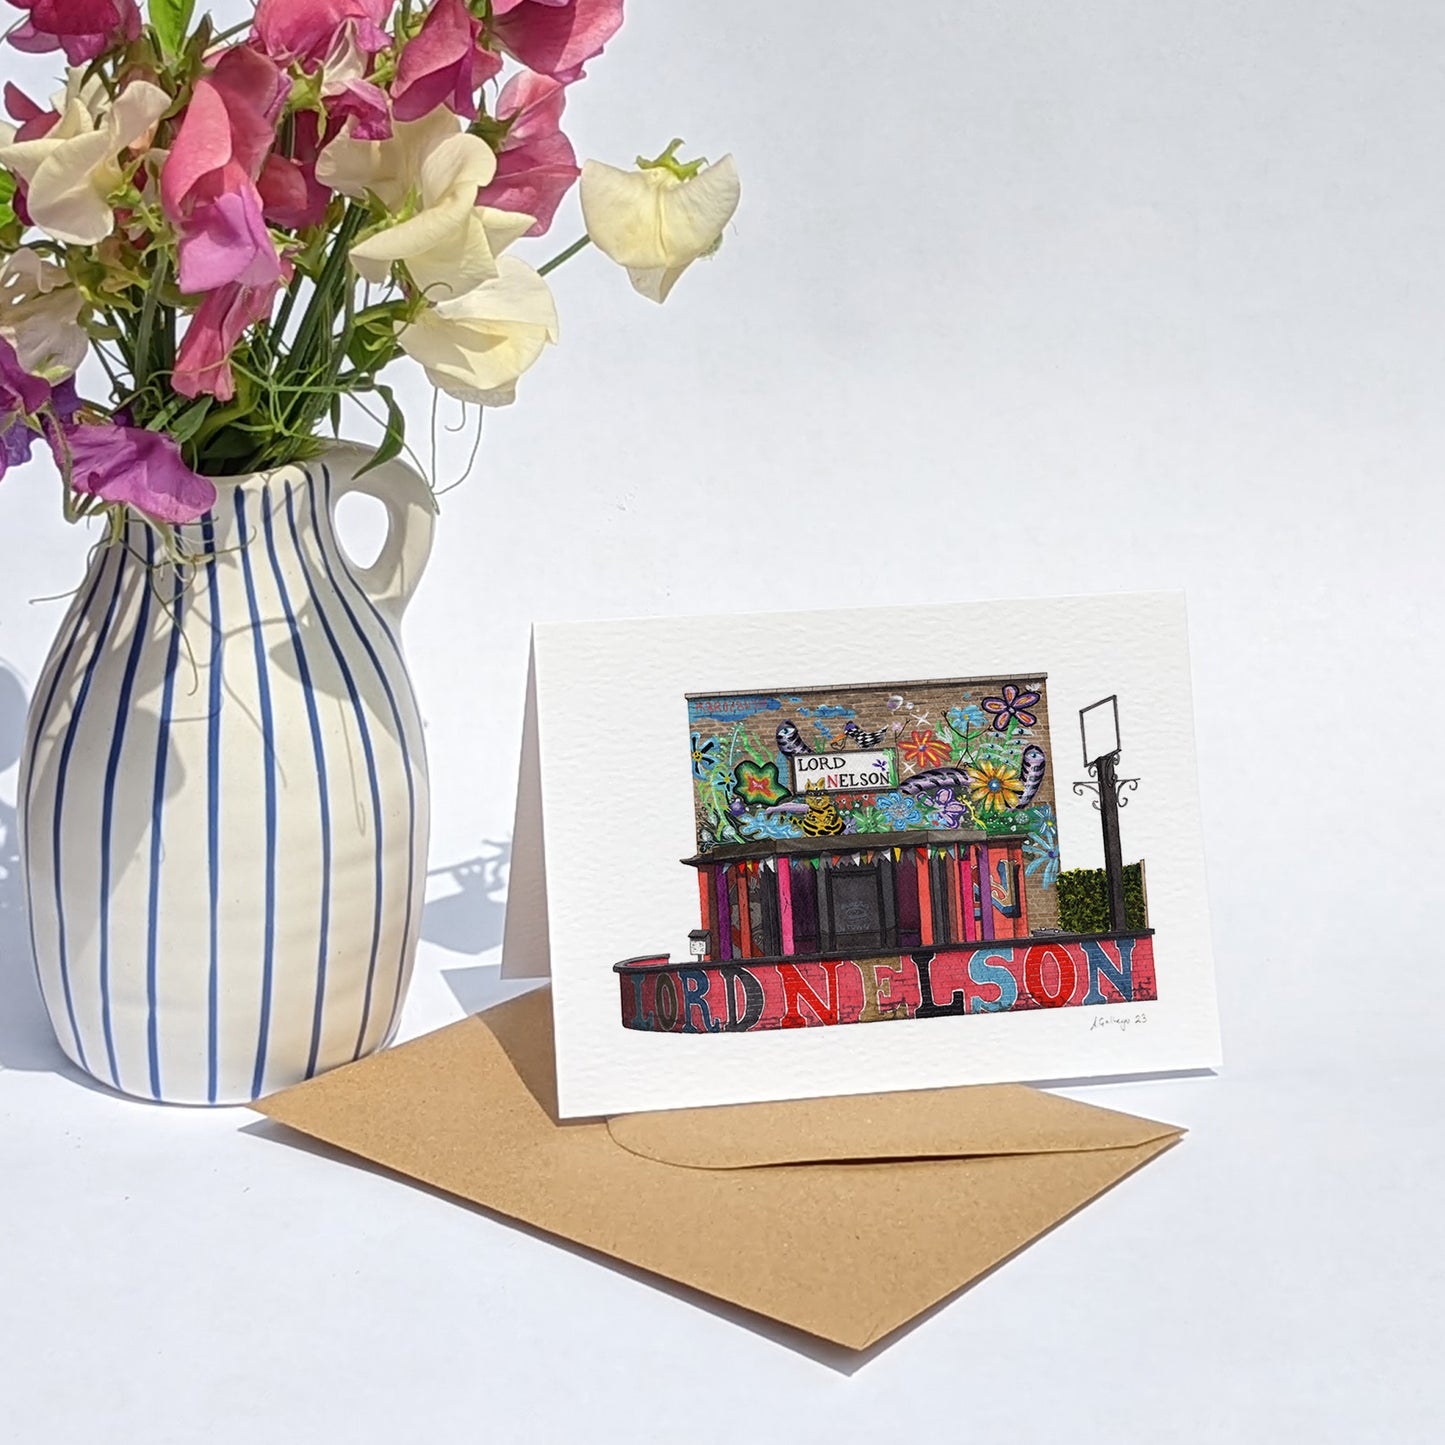 Southwark - Lord Nelson pub - Greeting card with envelope